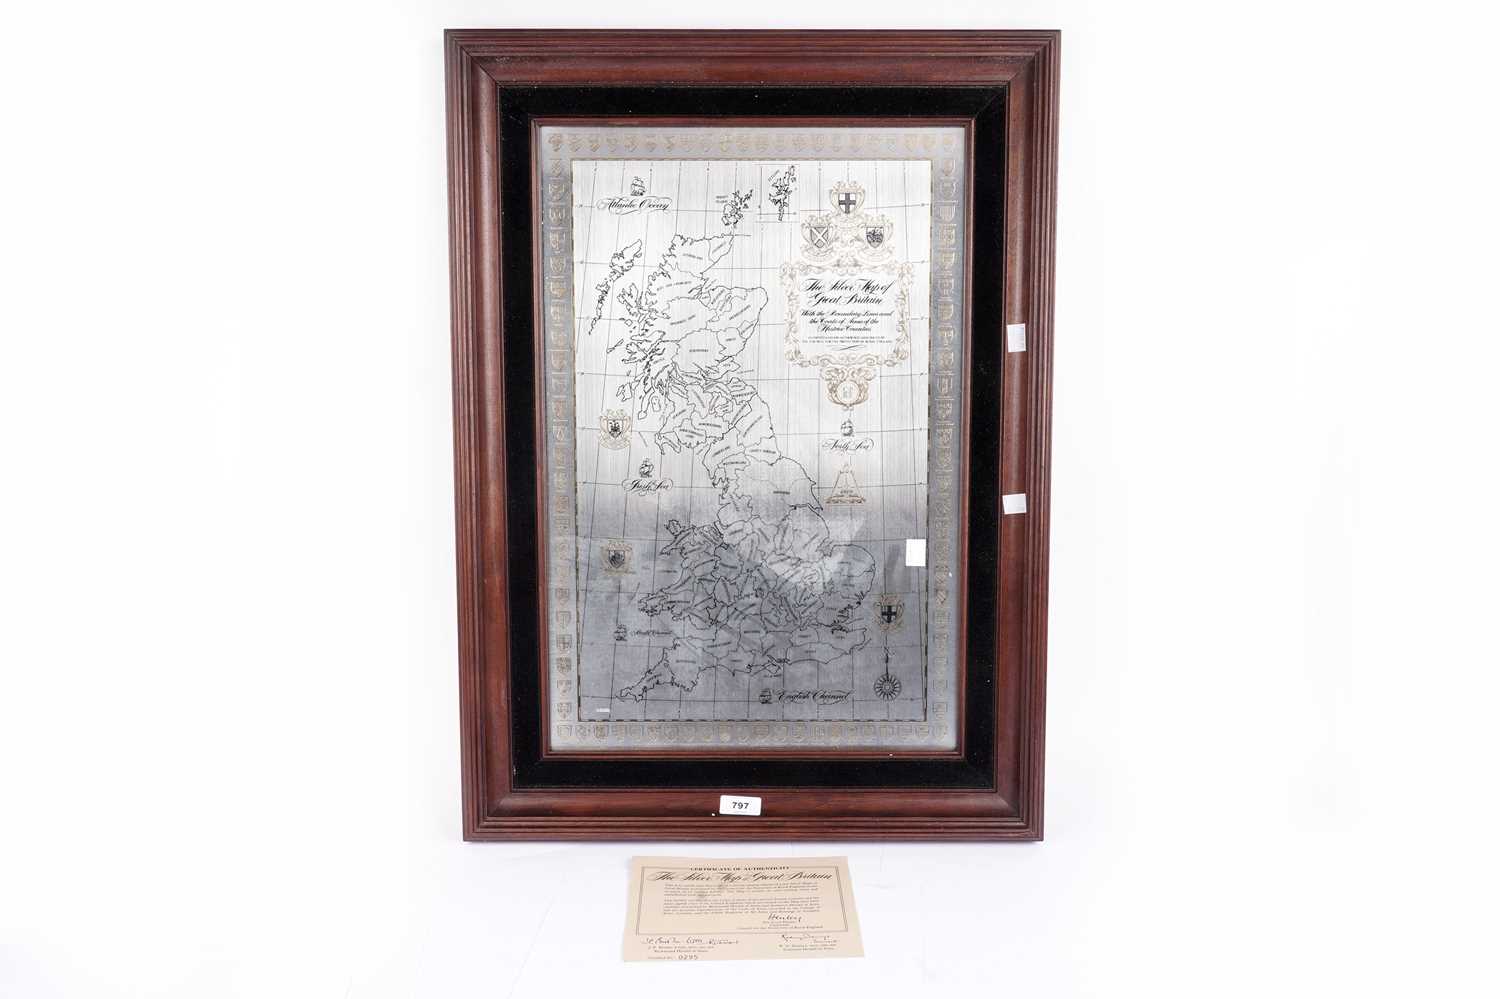 "The Silver Map of Great Britain" limited edition silver map